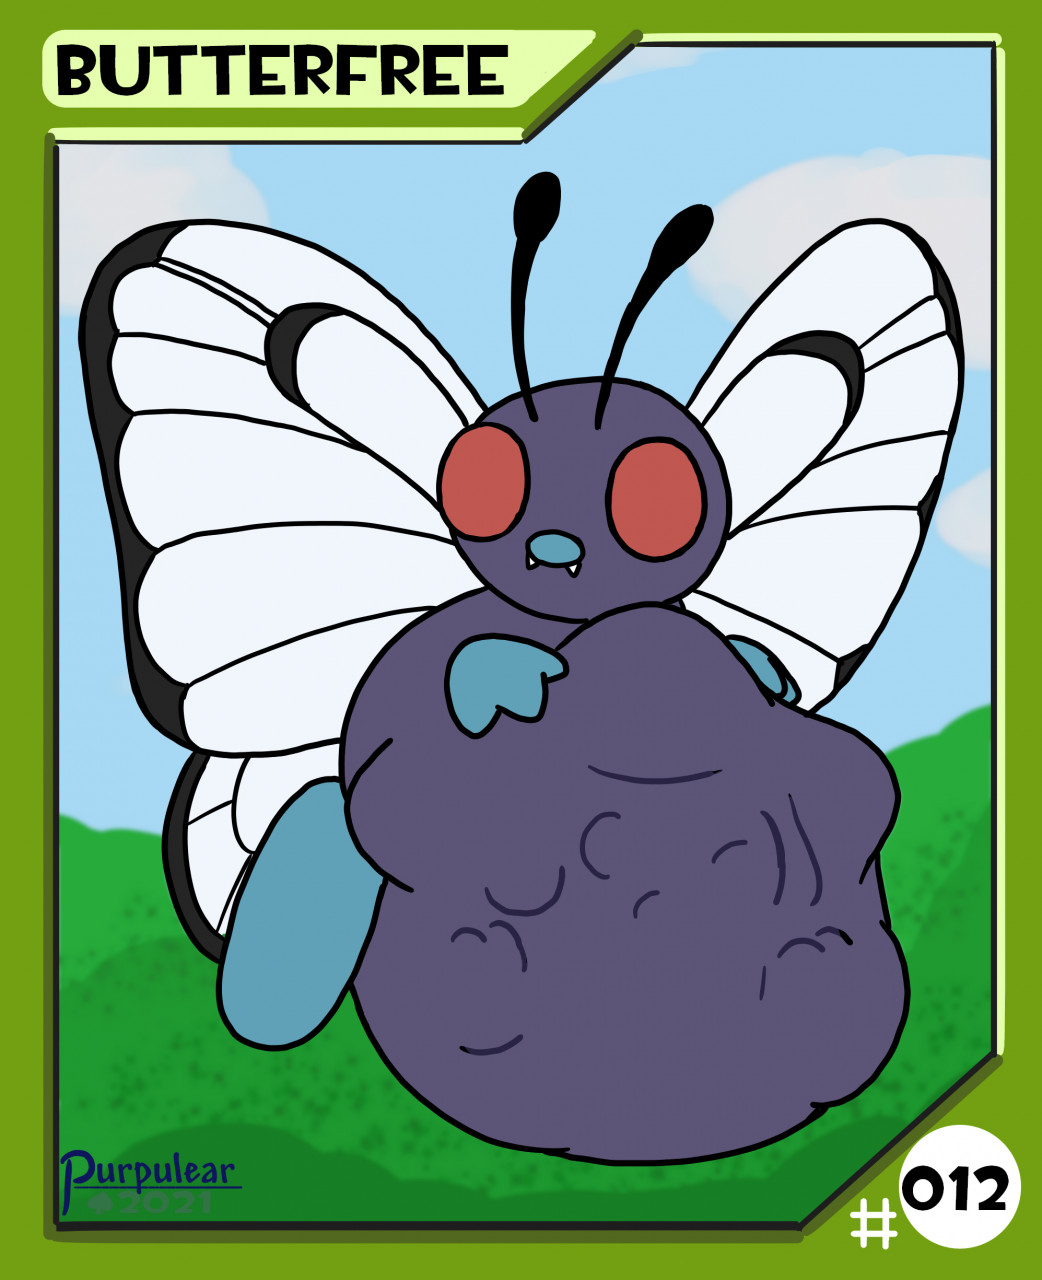 Bobby hill butterfree